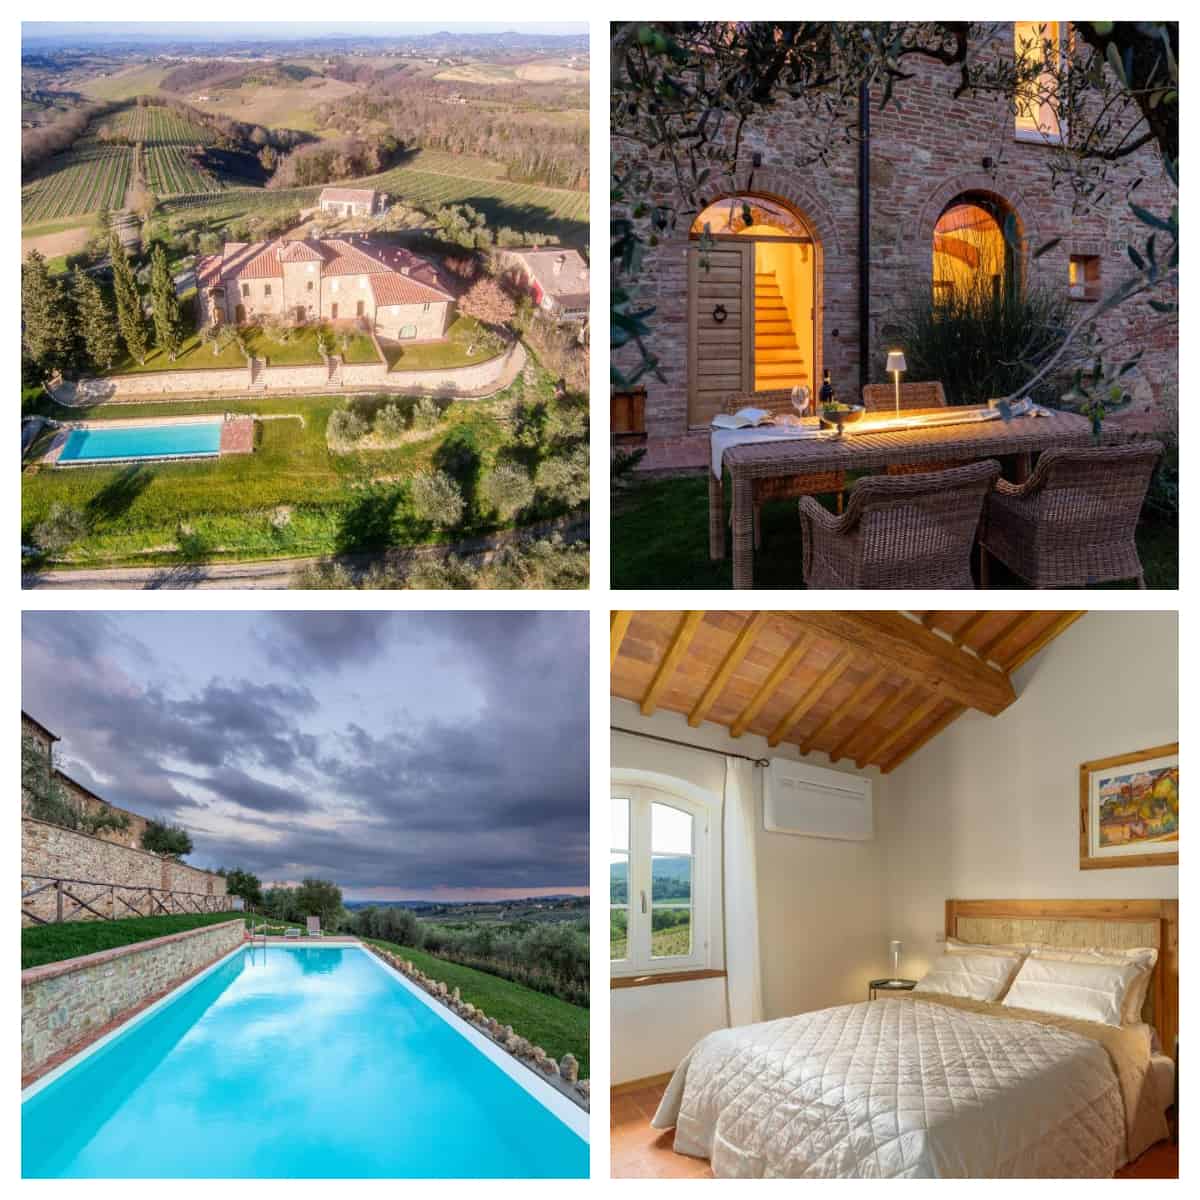 Best hotels in Tuscan Countryside